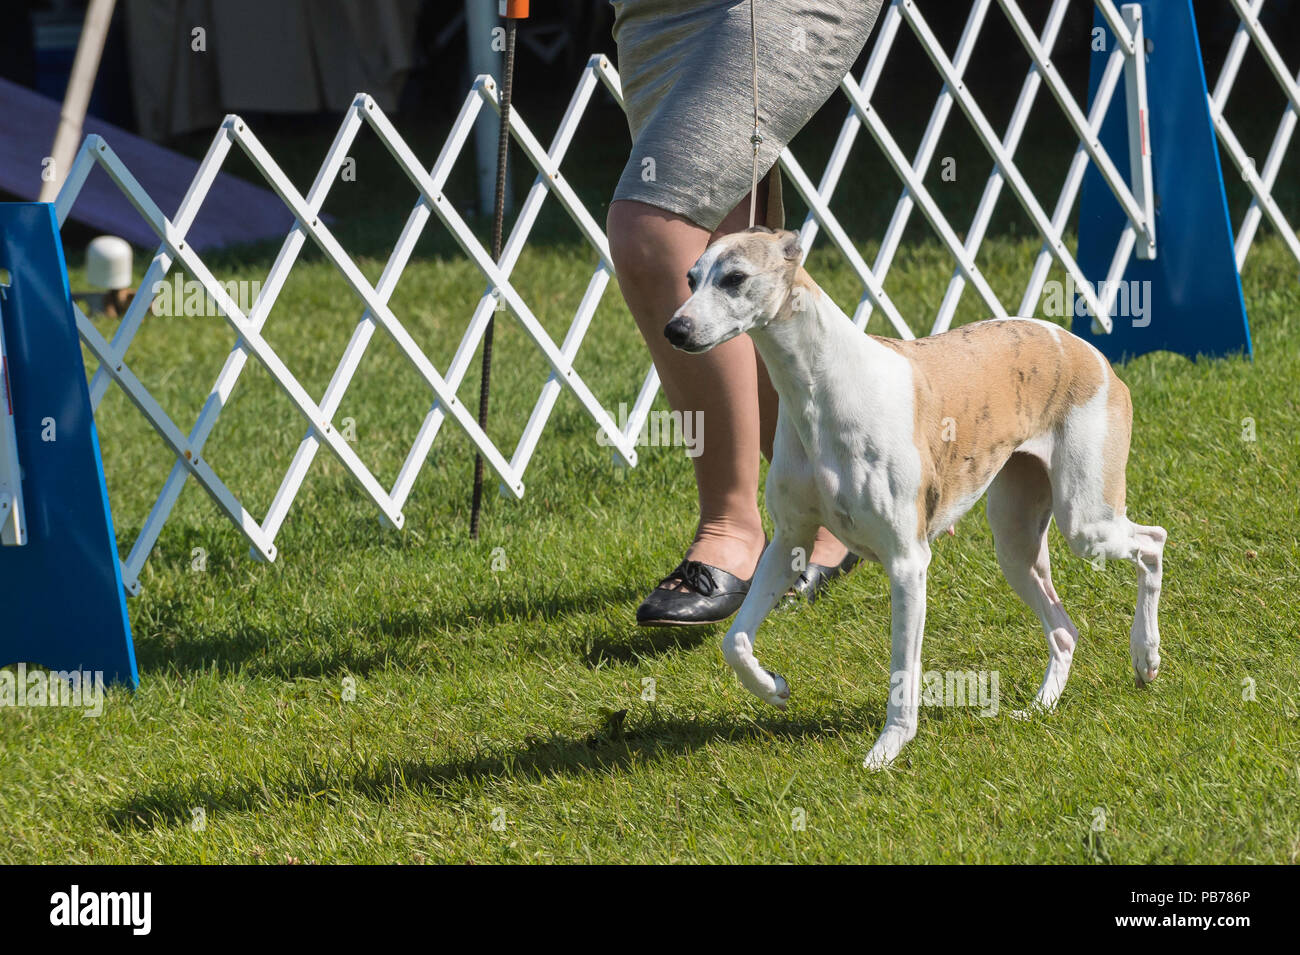 Whippet Dog Evelyn Kenny Kennel And Obedience Club Dog Show Alberta Canada Stock Photo Alamy